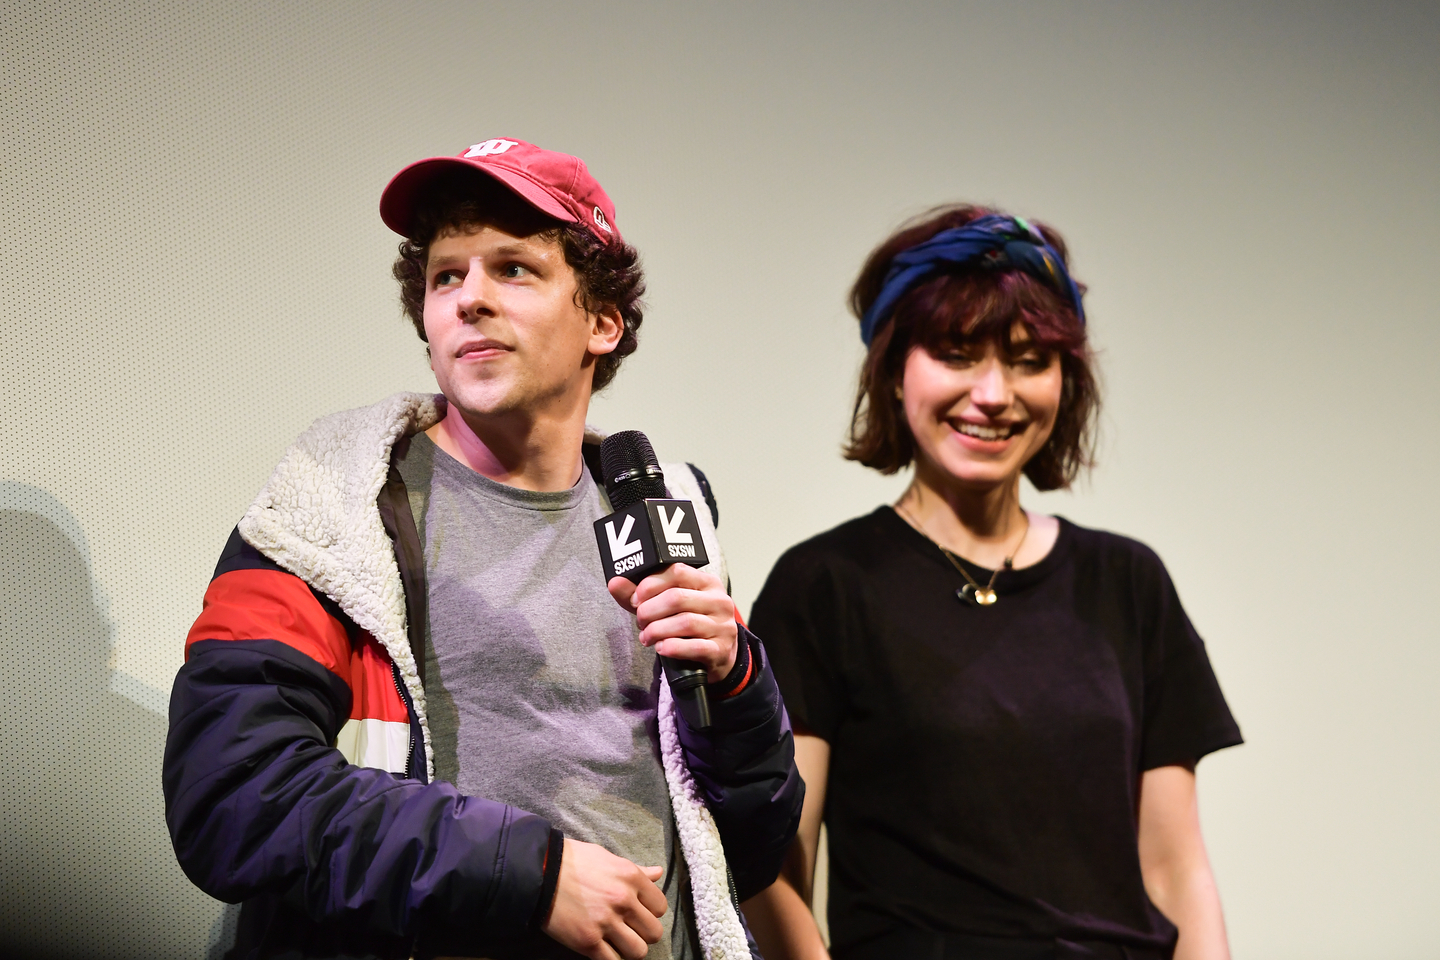 Jesse Eisenberg and Imogen Poots attend the The Art Of Self-Defense Premiere at the Paramount Theatre.